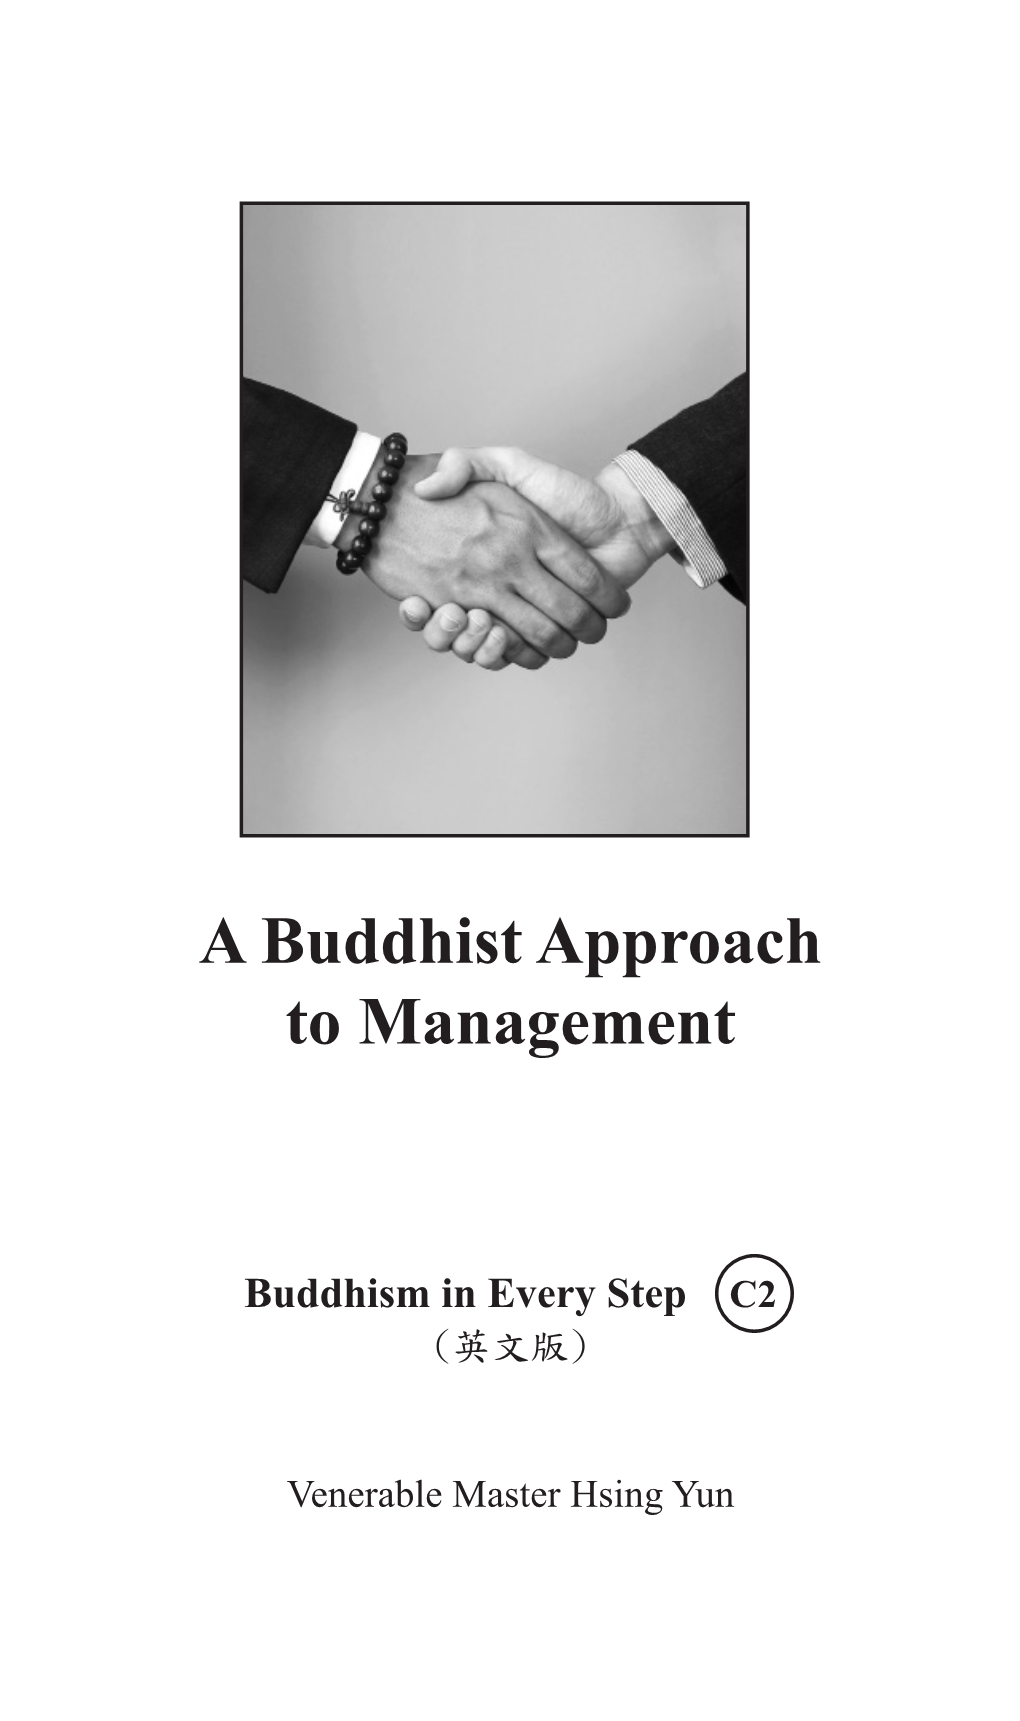 A Buddhist Approach to Management